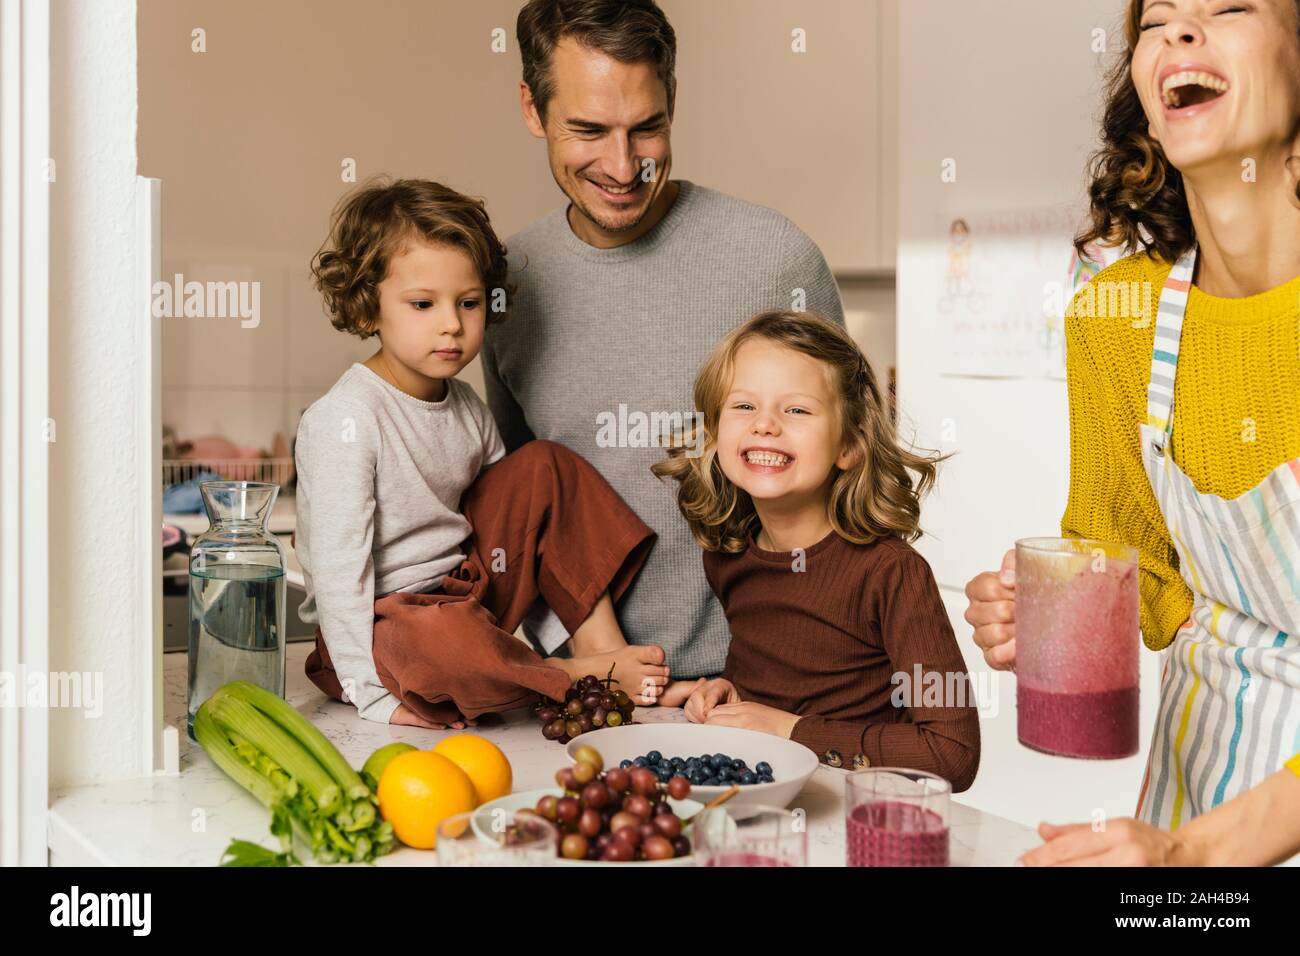 Happy family making a smoothie in kitchen Stock Photo